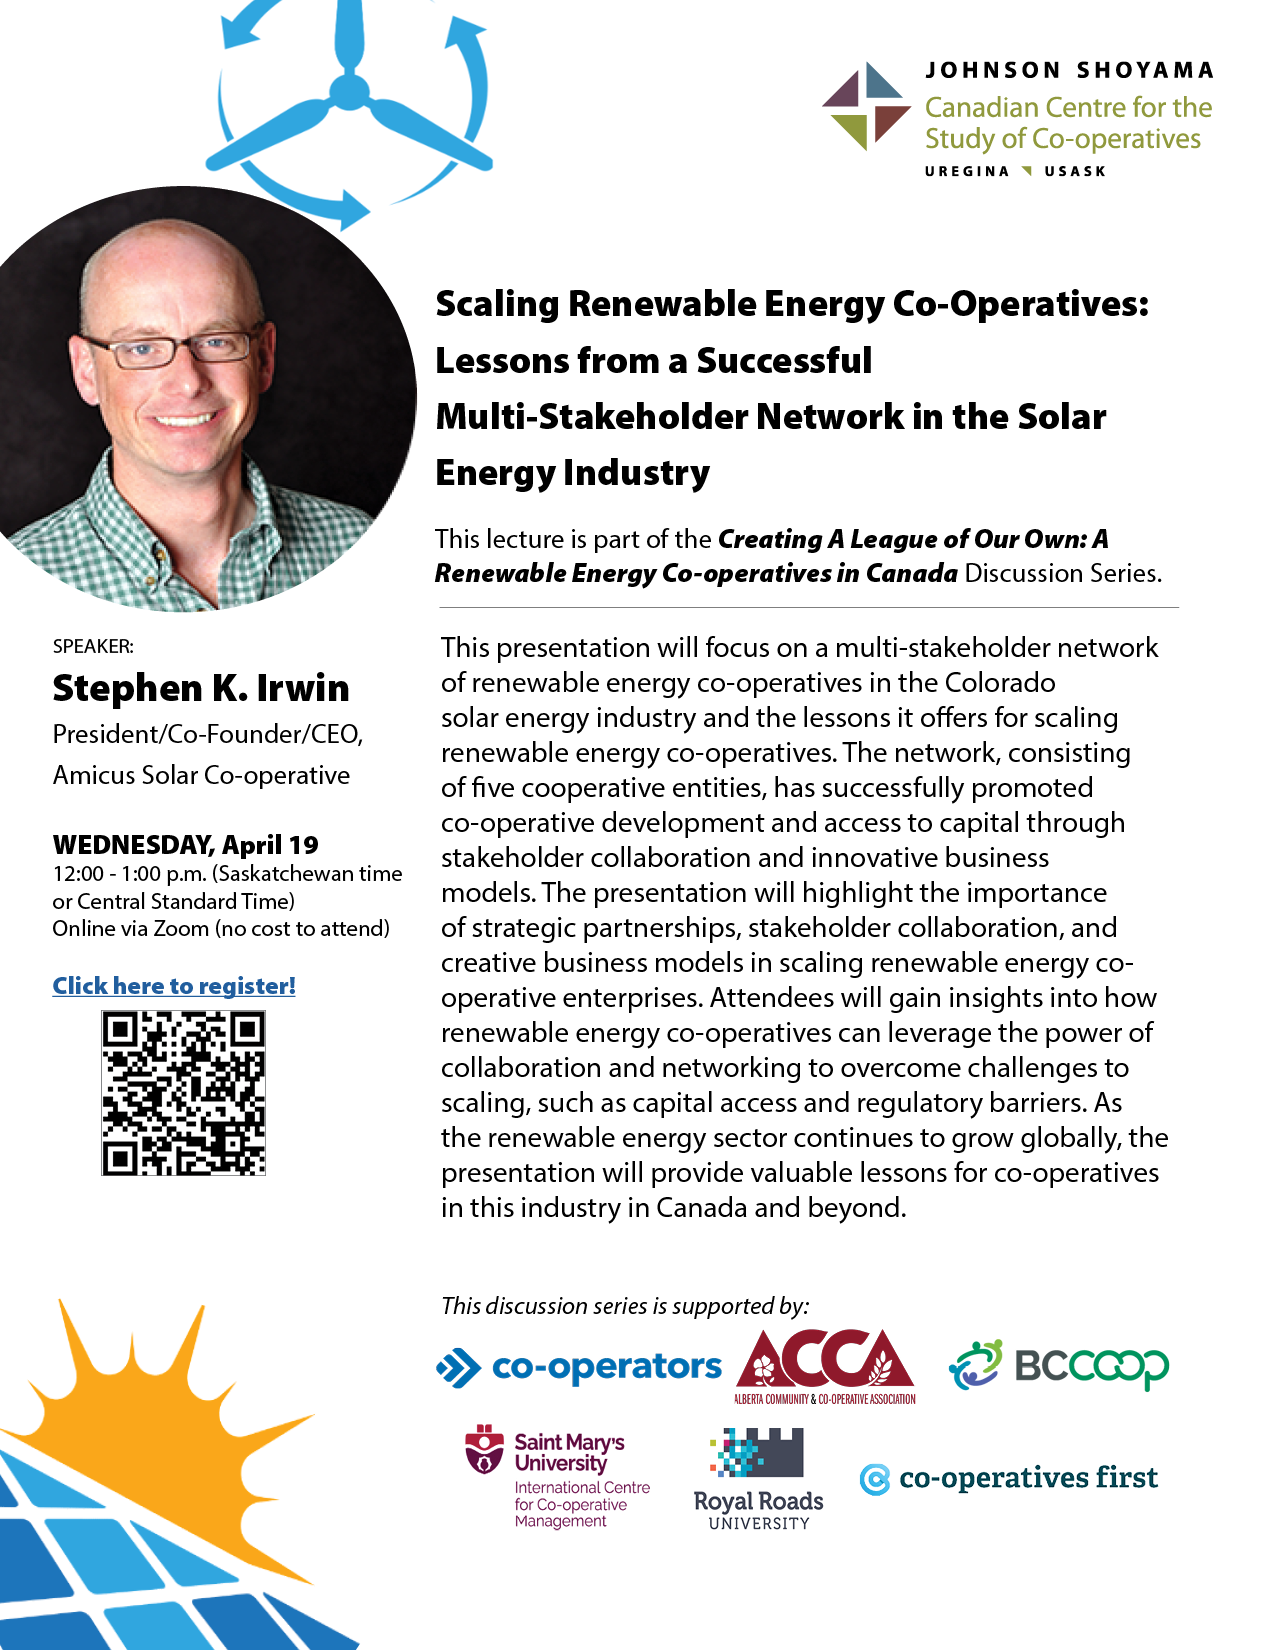 Scaling Renewable Energy Co-operatives: Lessons from a Successful Multi-Stakeholder Network in the Solar Energy Industry